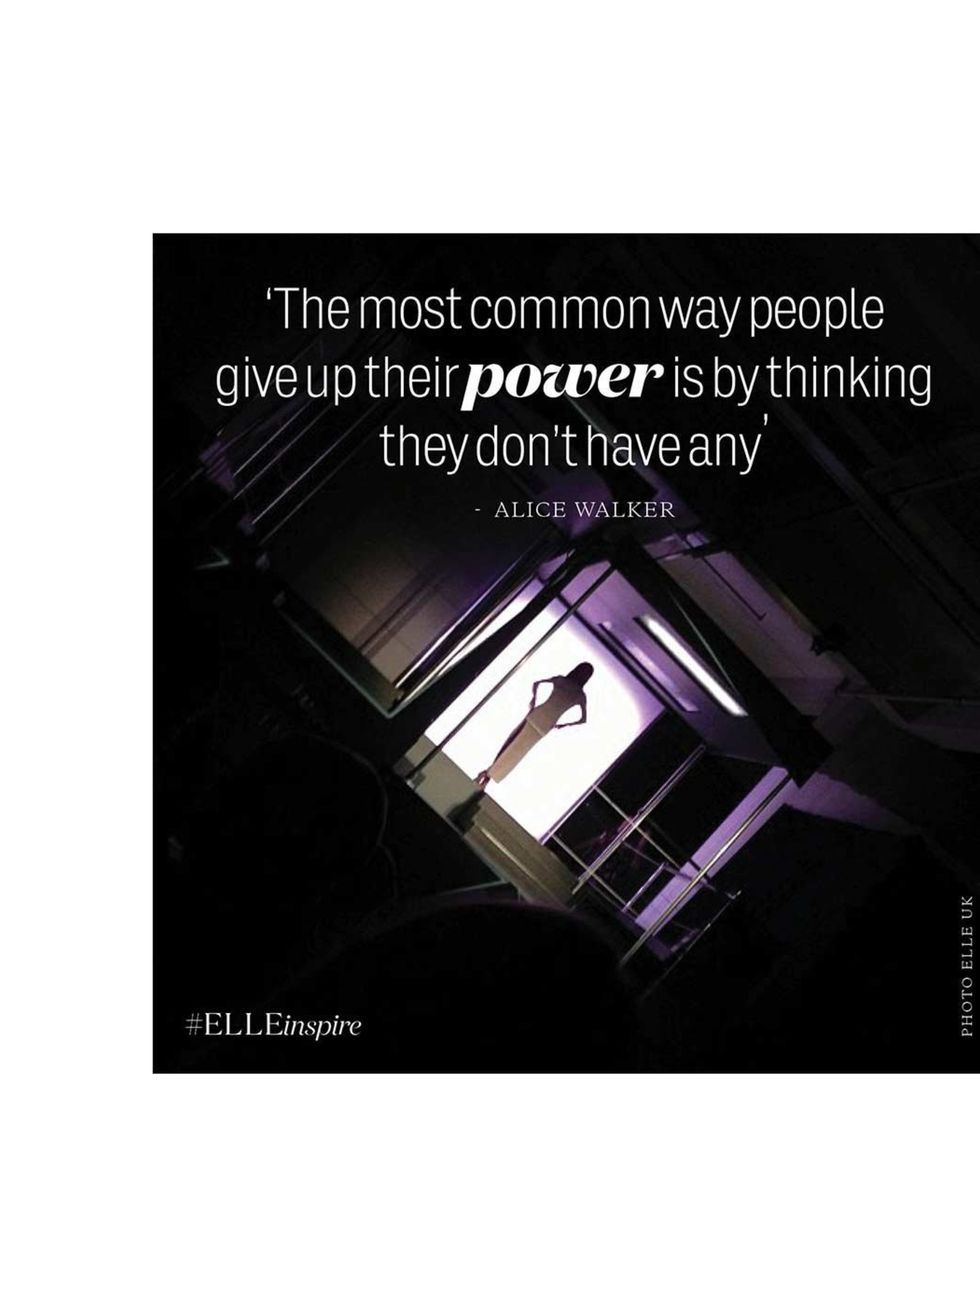 <p>'The most common way people give up their power is by thinking they don't have any.' Alice Walker</p>